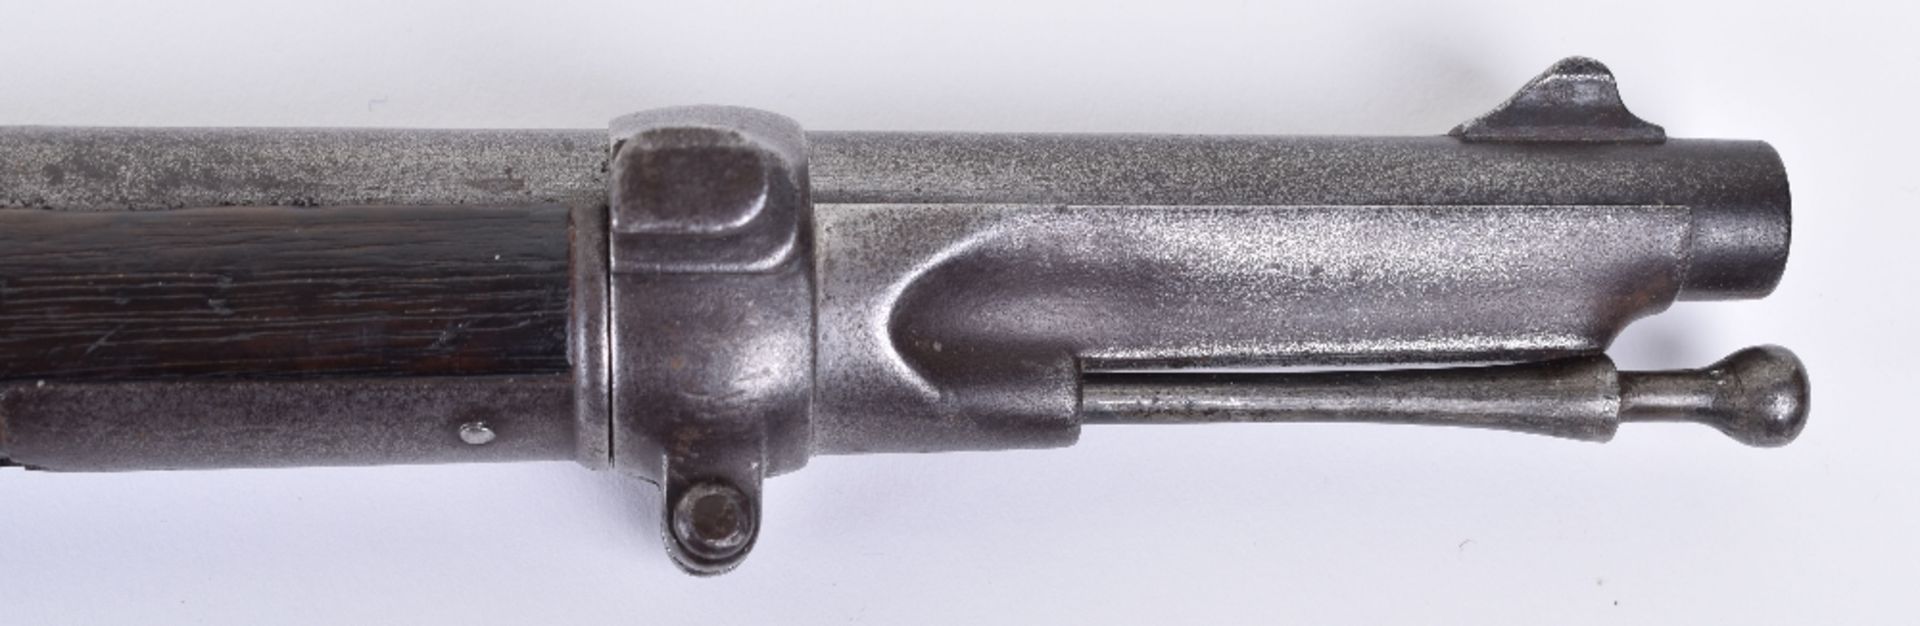 A .477/.550 Martini-Henry I.C.1 cavalry carbine - Image 5 of 12